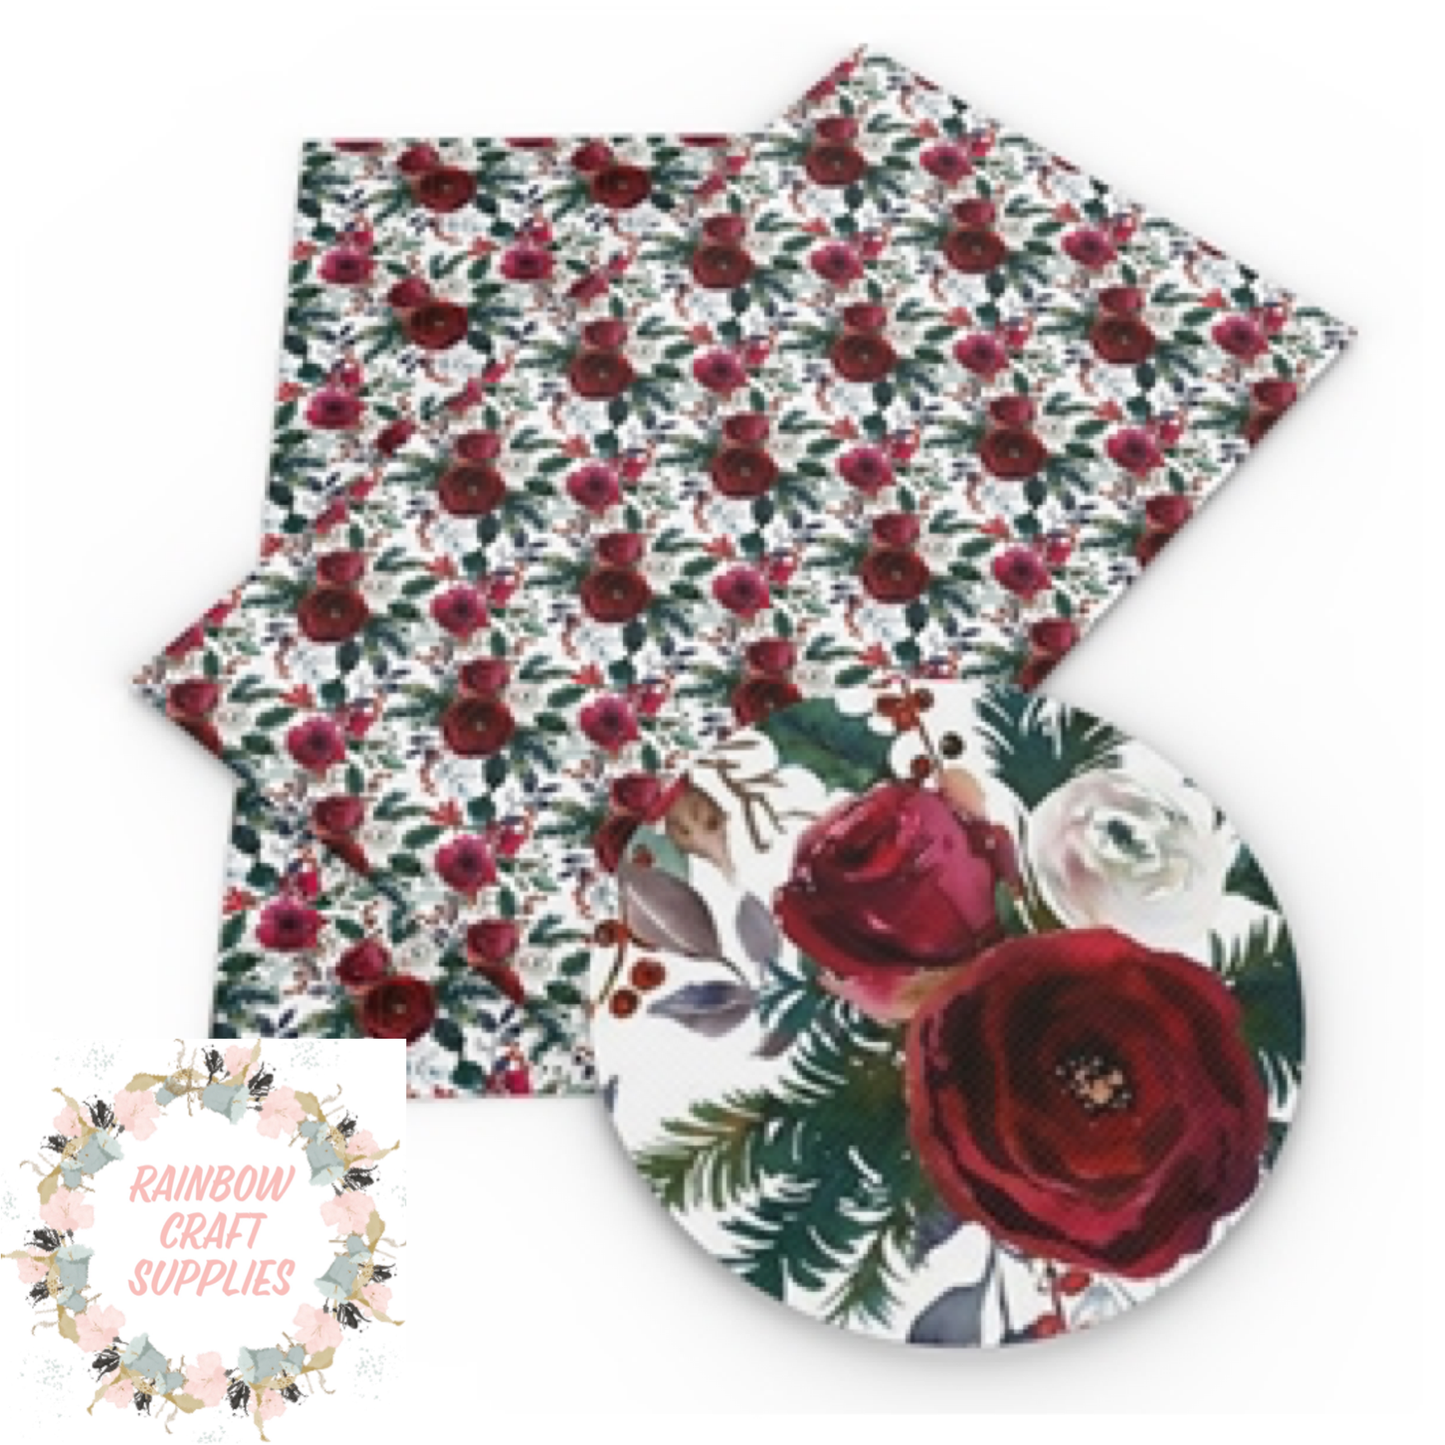 Floral patterned leatherette fabric